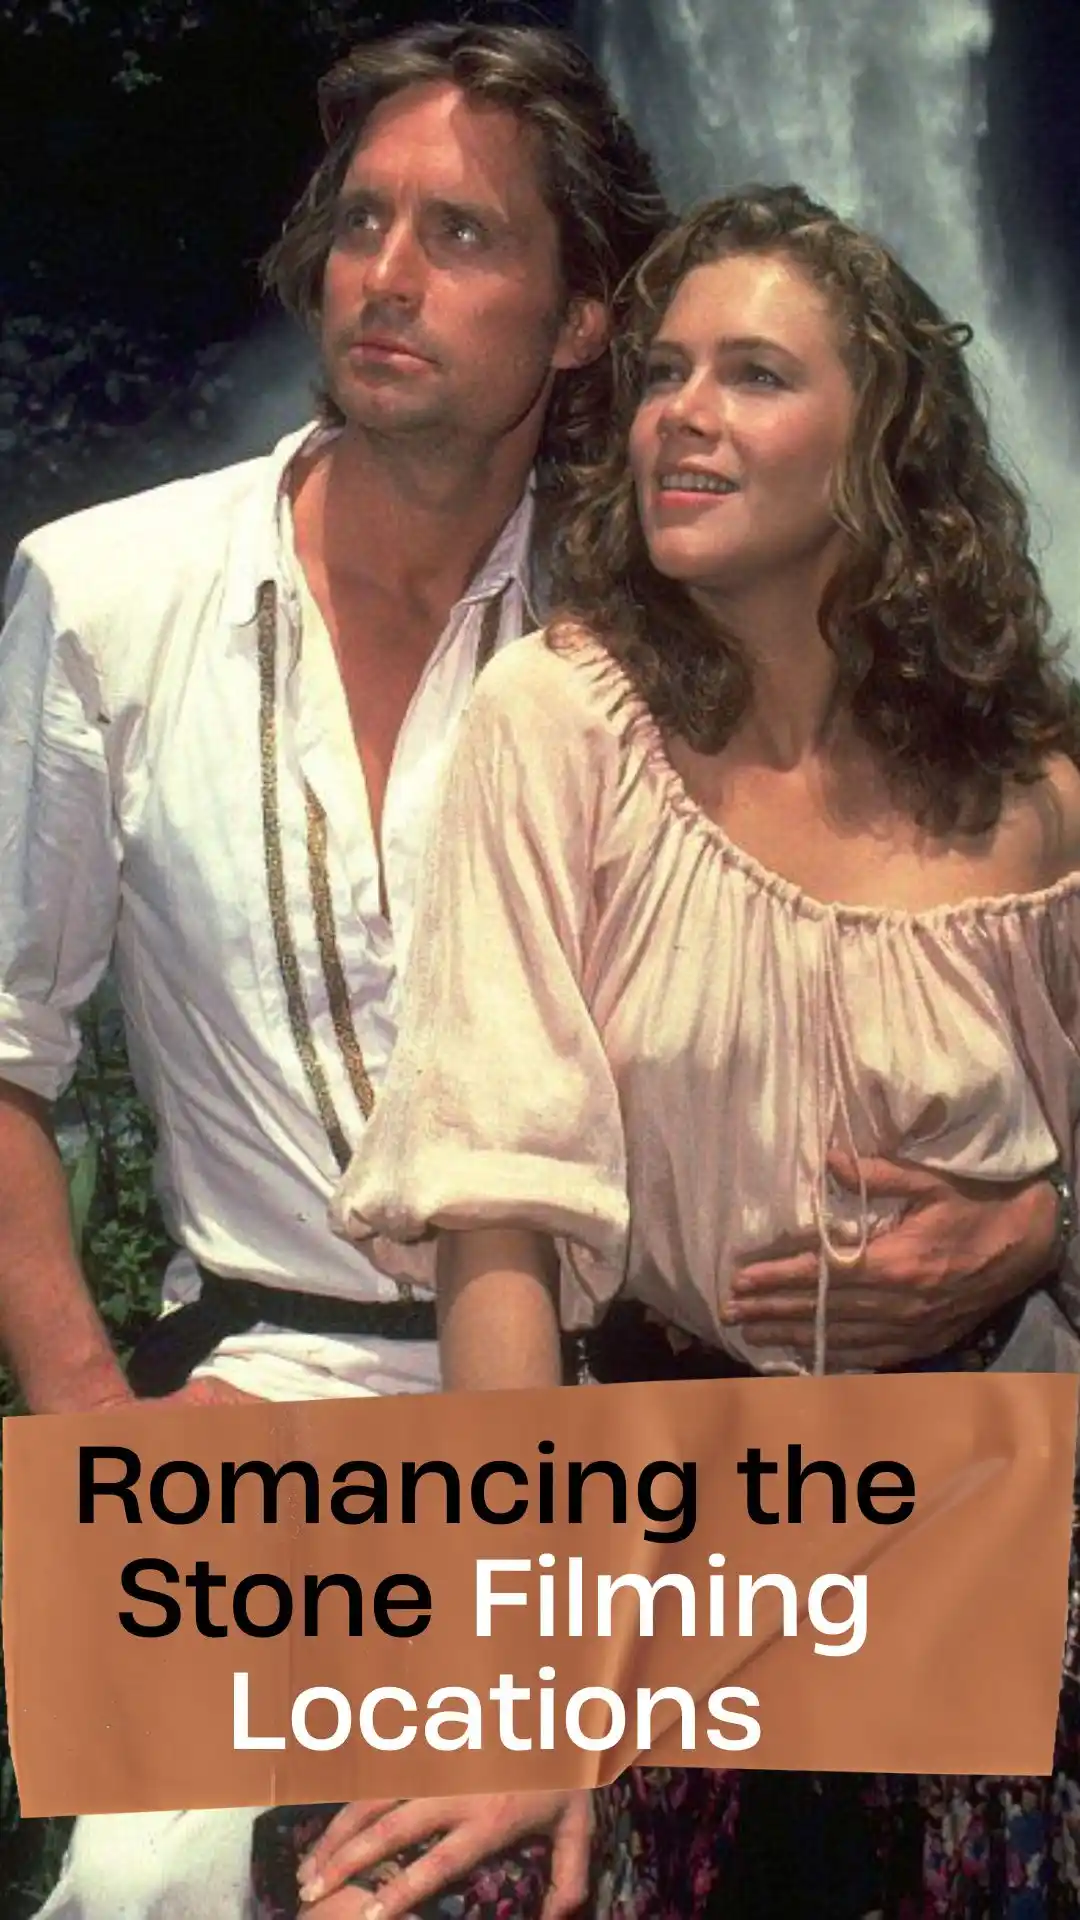 Romancing the Stone Filming Locations